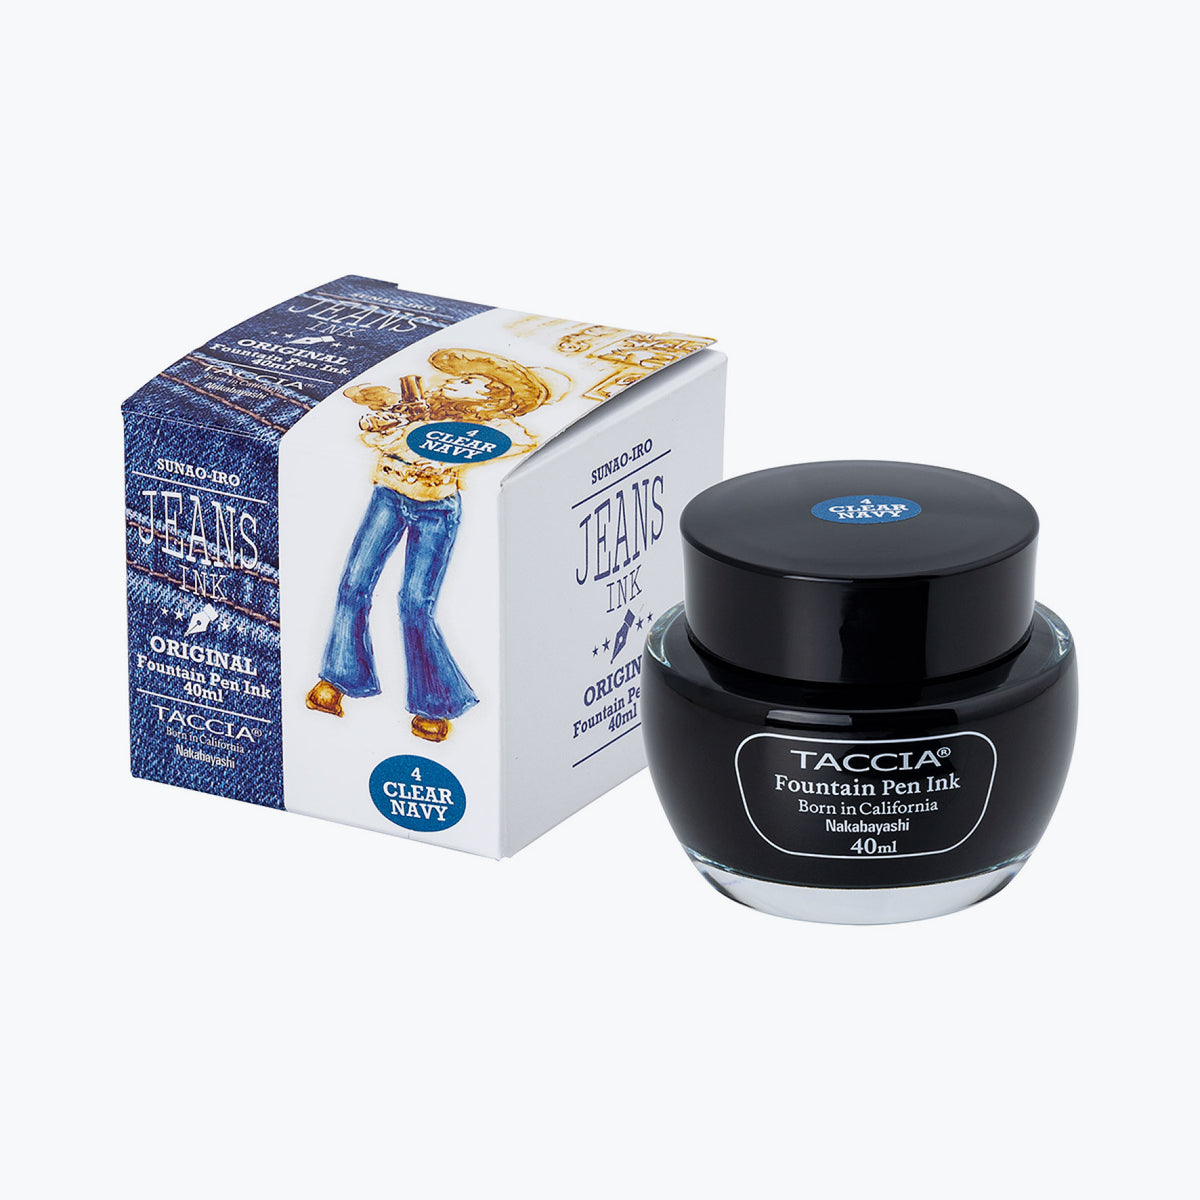 Taccia - Fountain Pen Ink - Jeans - Clear Navy